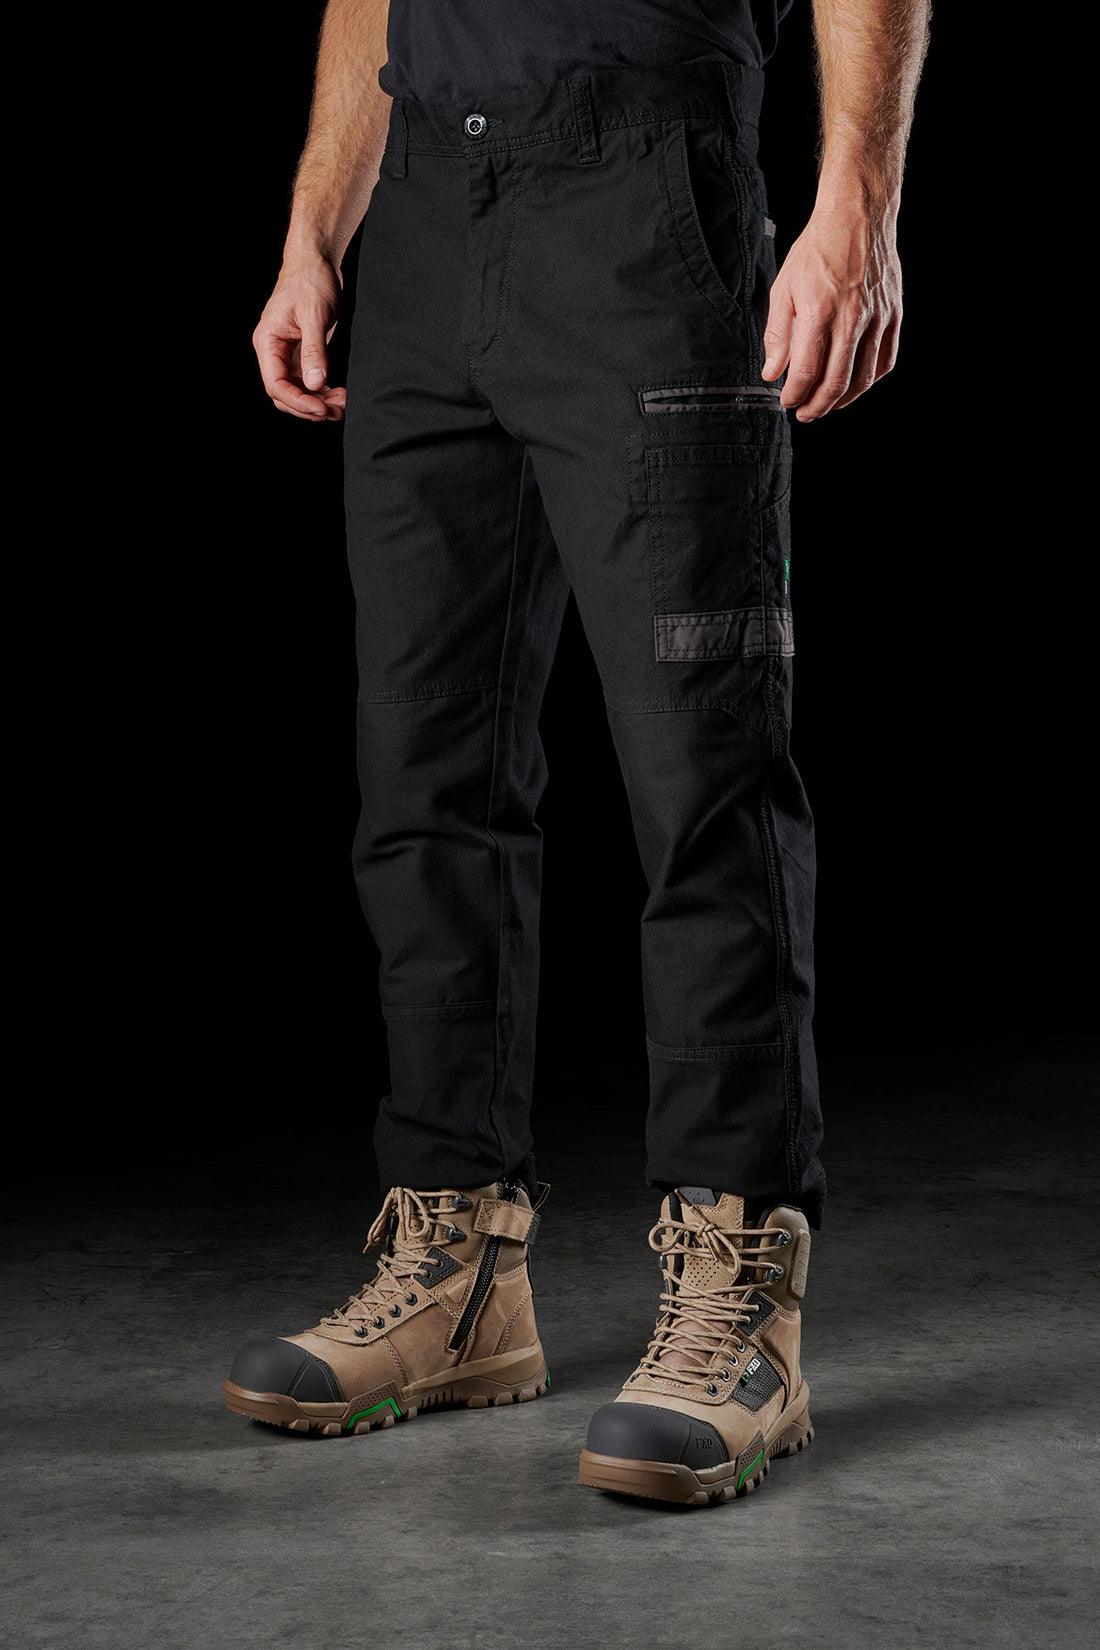 WP3 Work Cargo Pant - Black - Purpose-Built / Home of the Trades